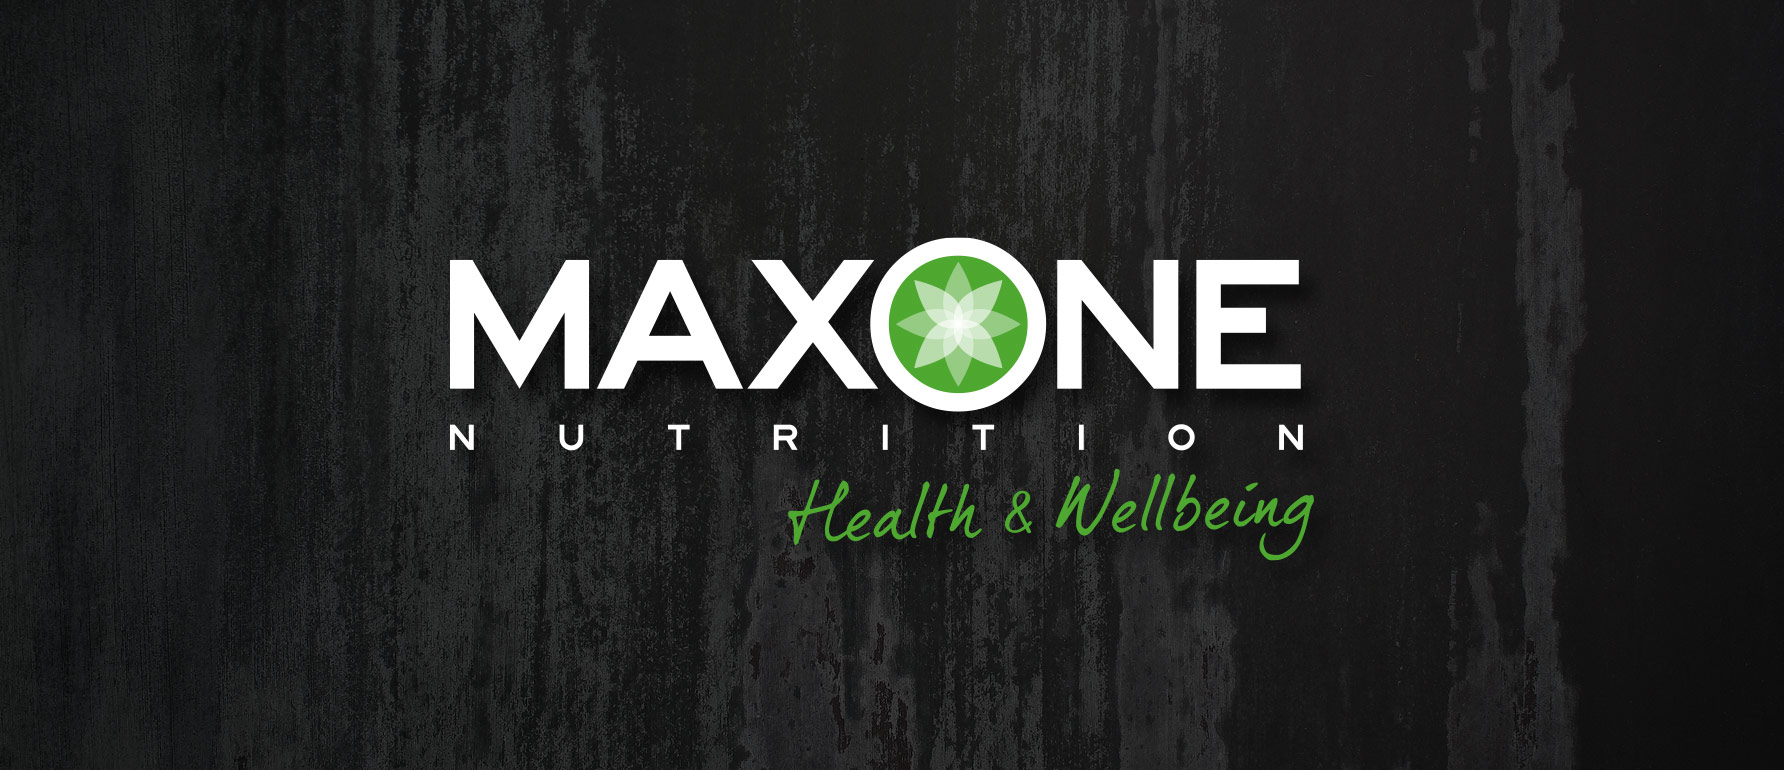 Branding and idntity for Max One Nutrition